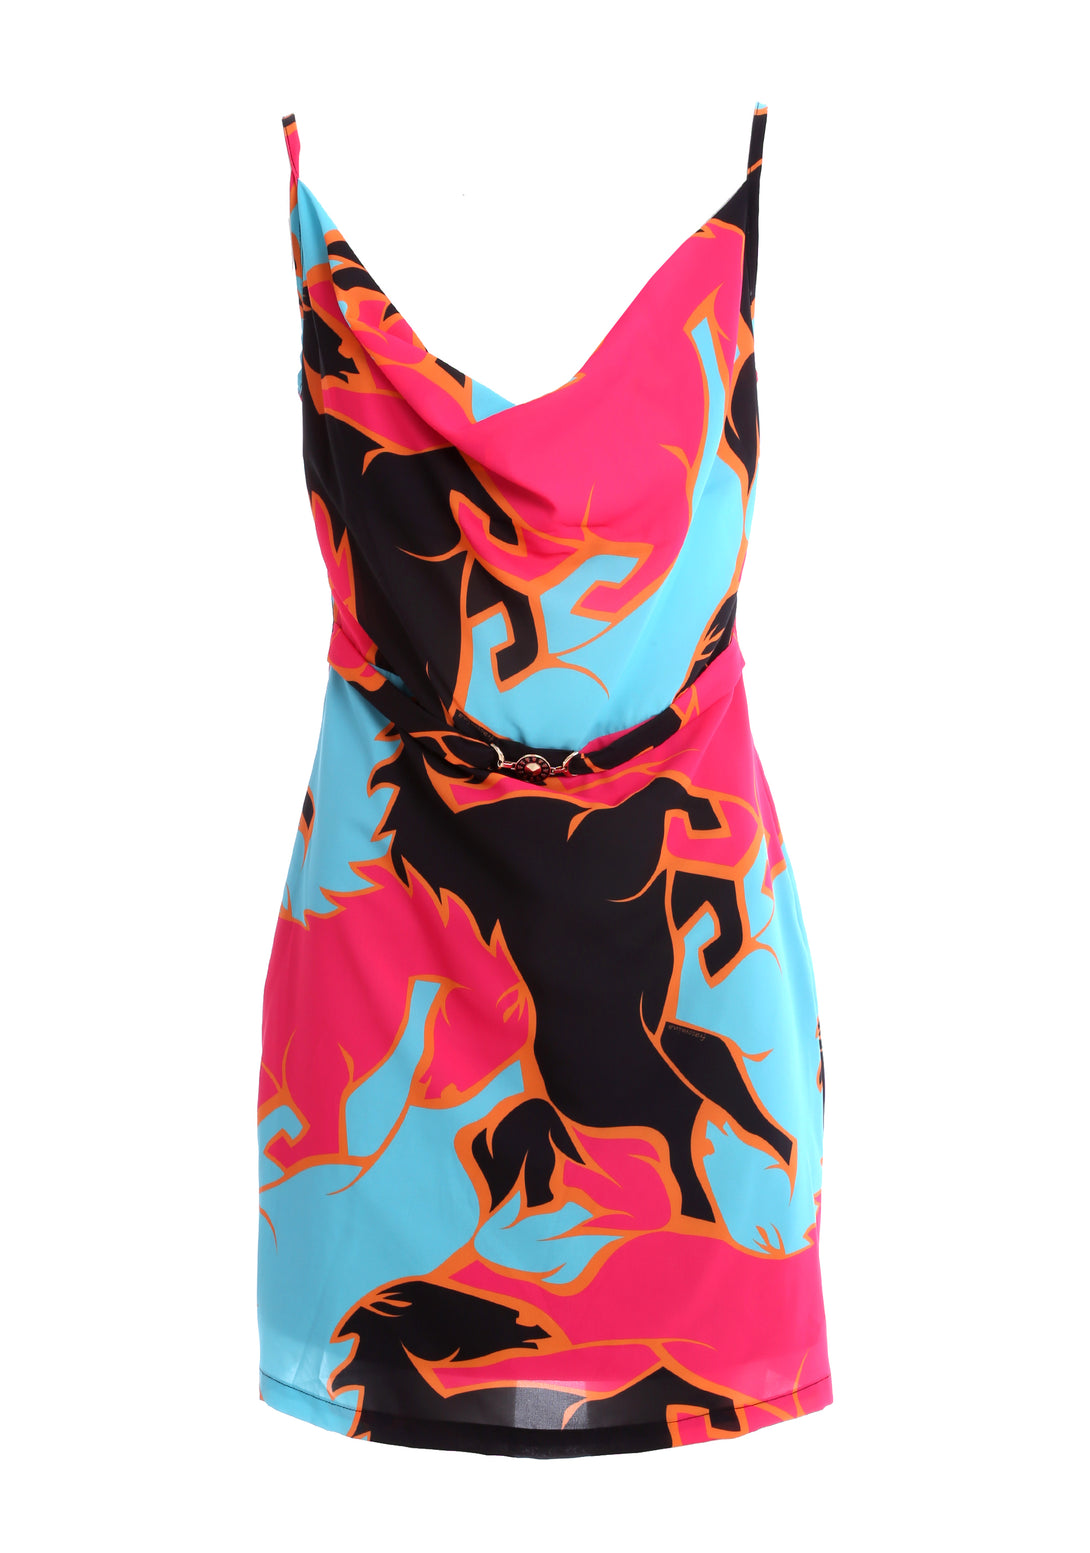 Sleeveless mini dress with multi color pattern